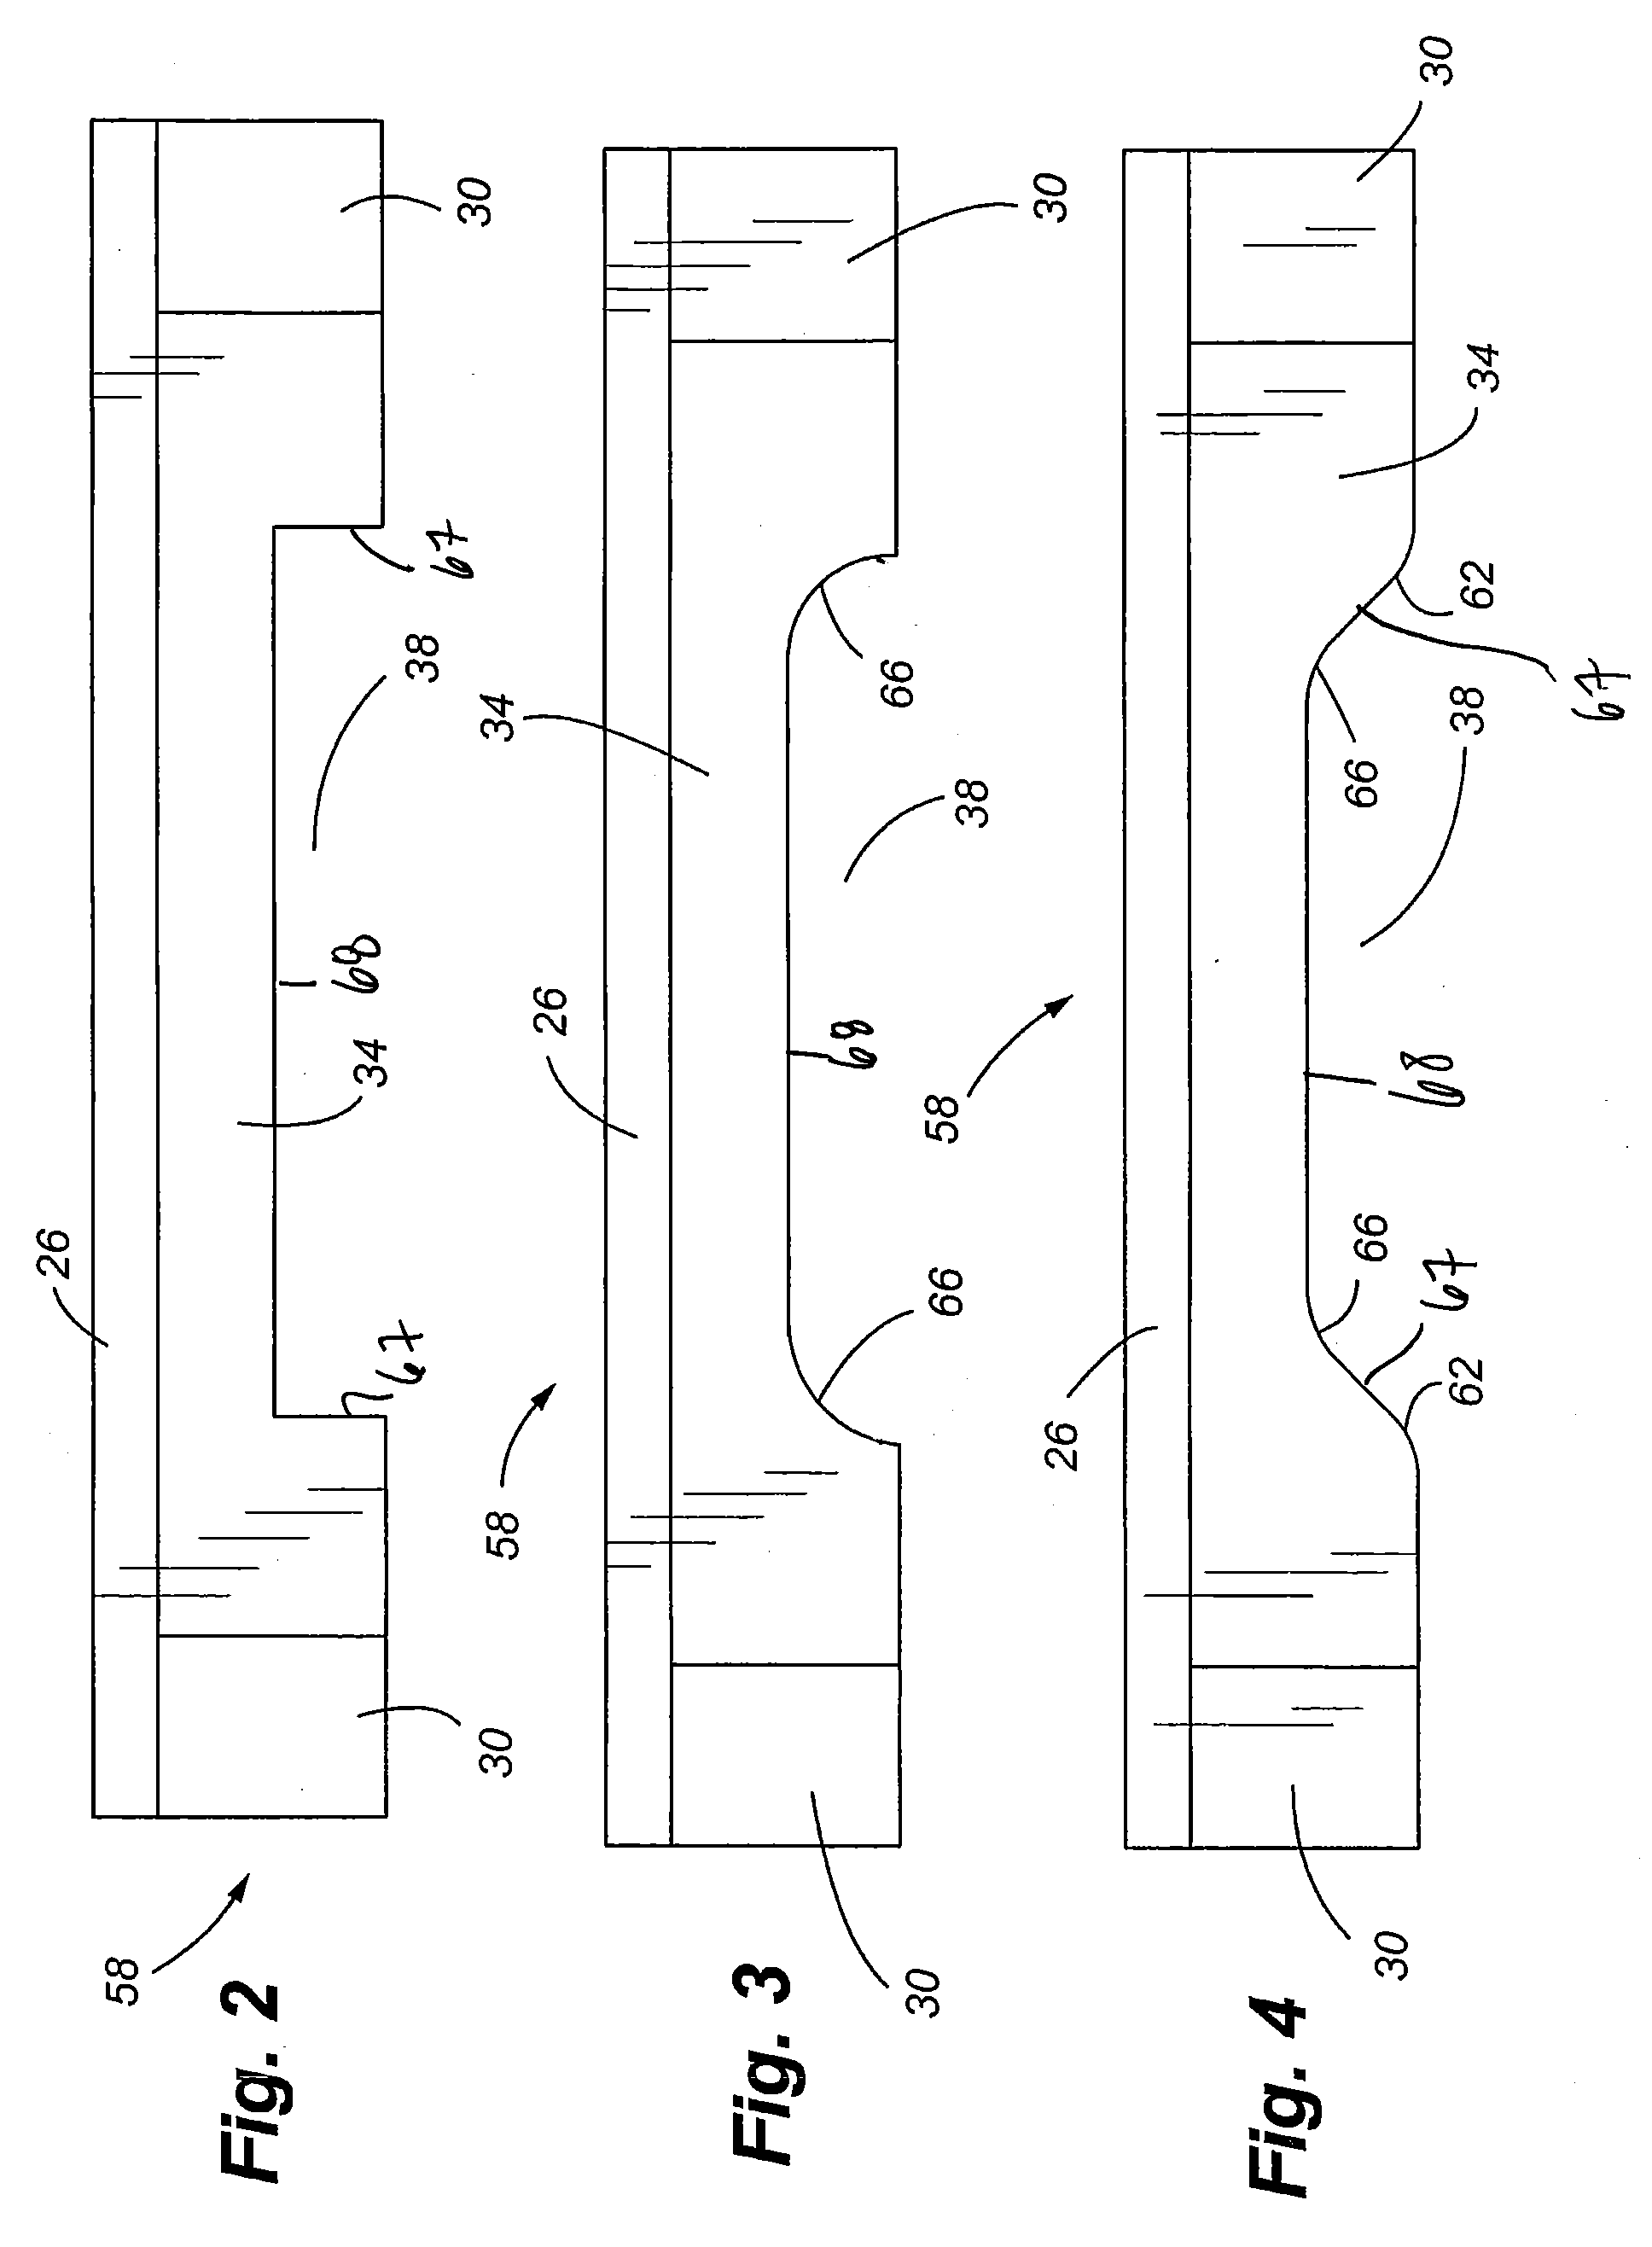 Apparatus and method for forming an opening in a concrete wall system